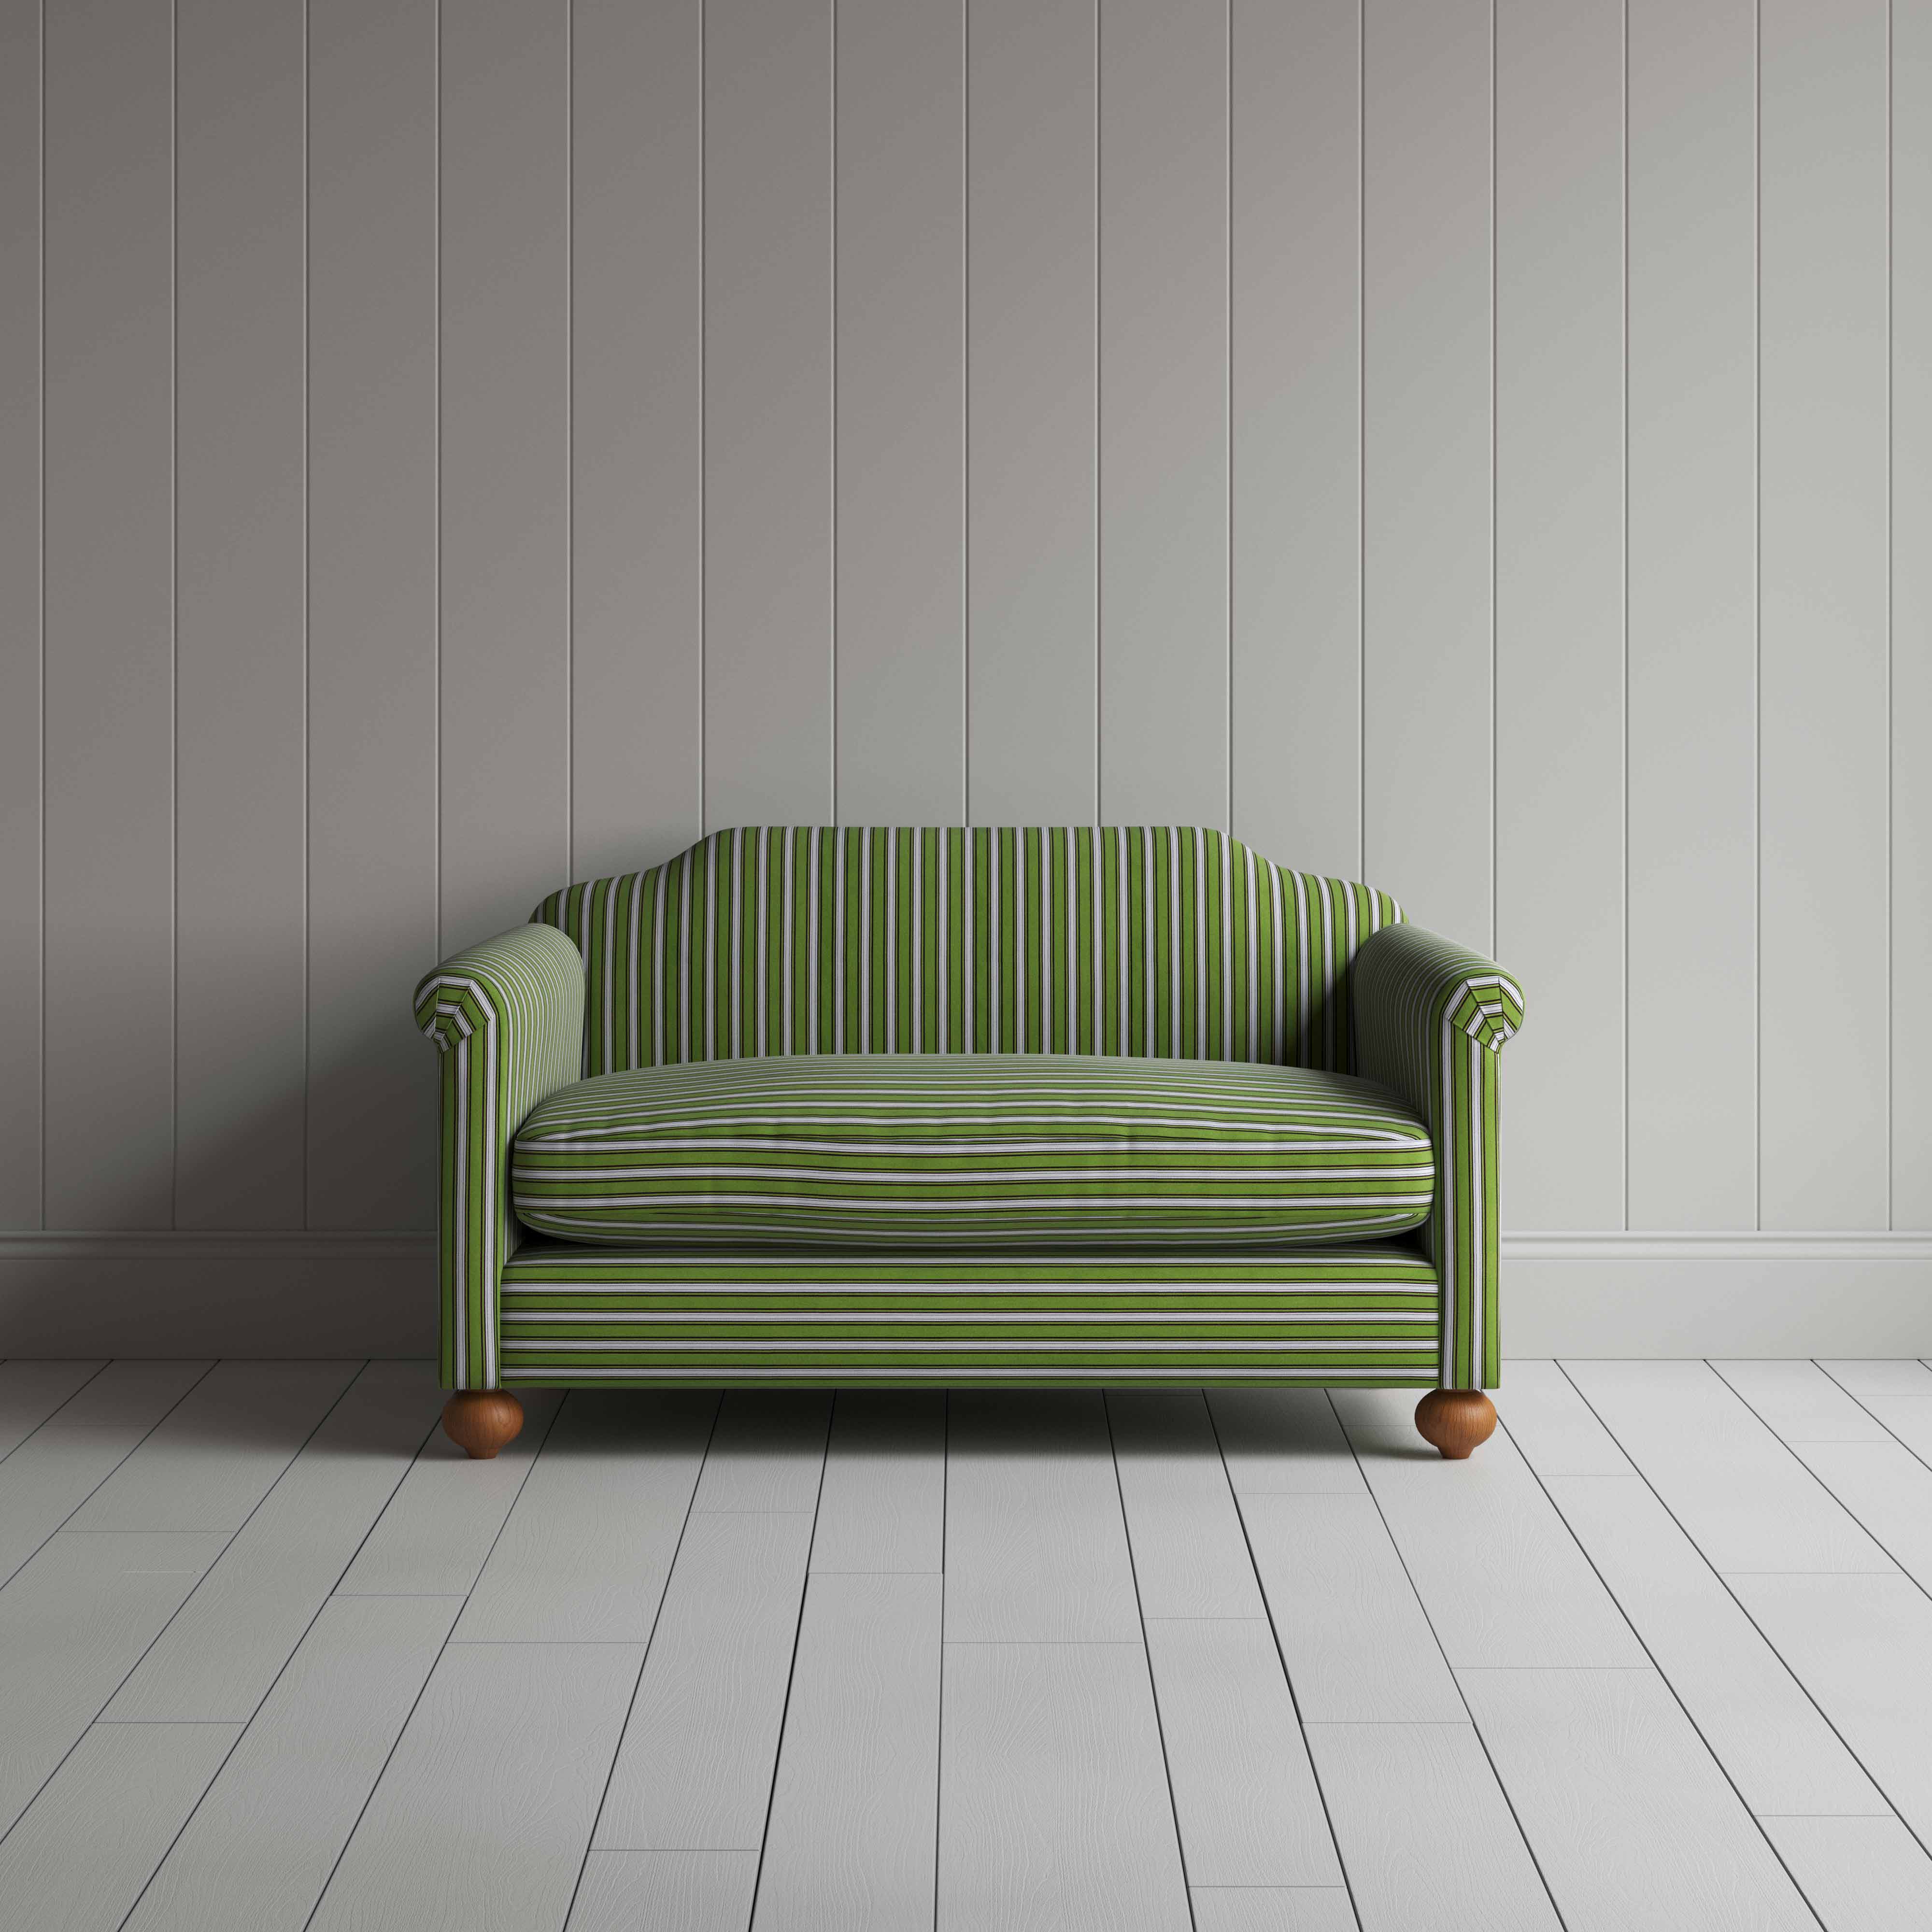  Dolittle 2 Seater Sofa in Colonnade Cotton, Green and Wine 